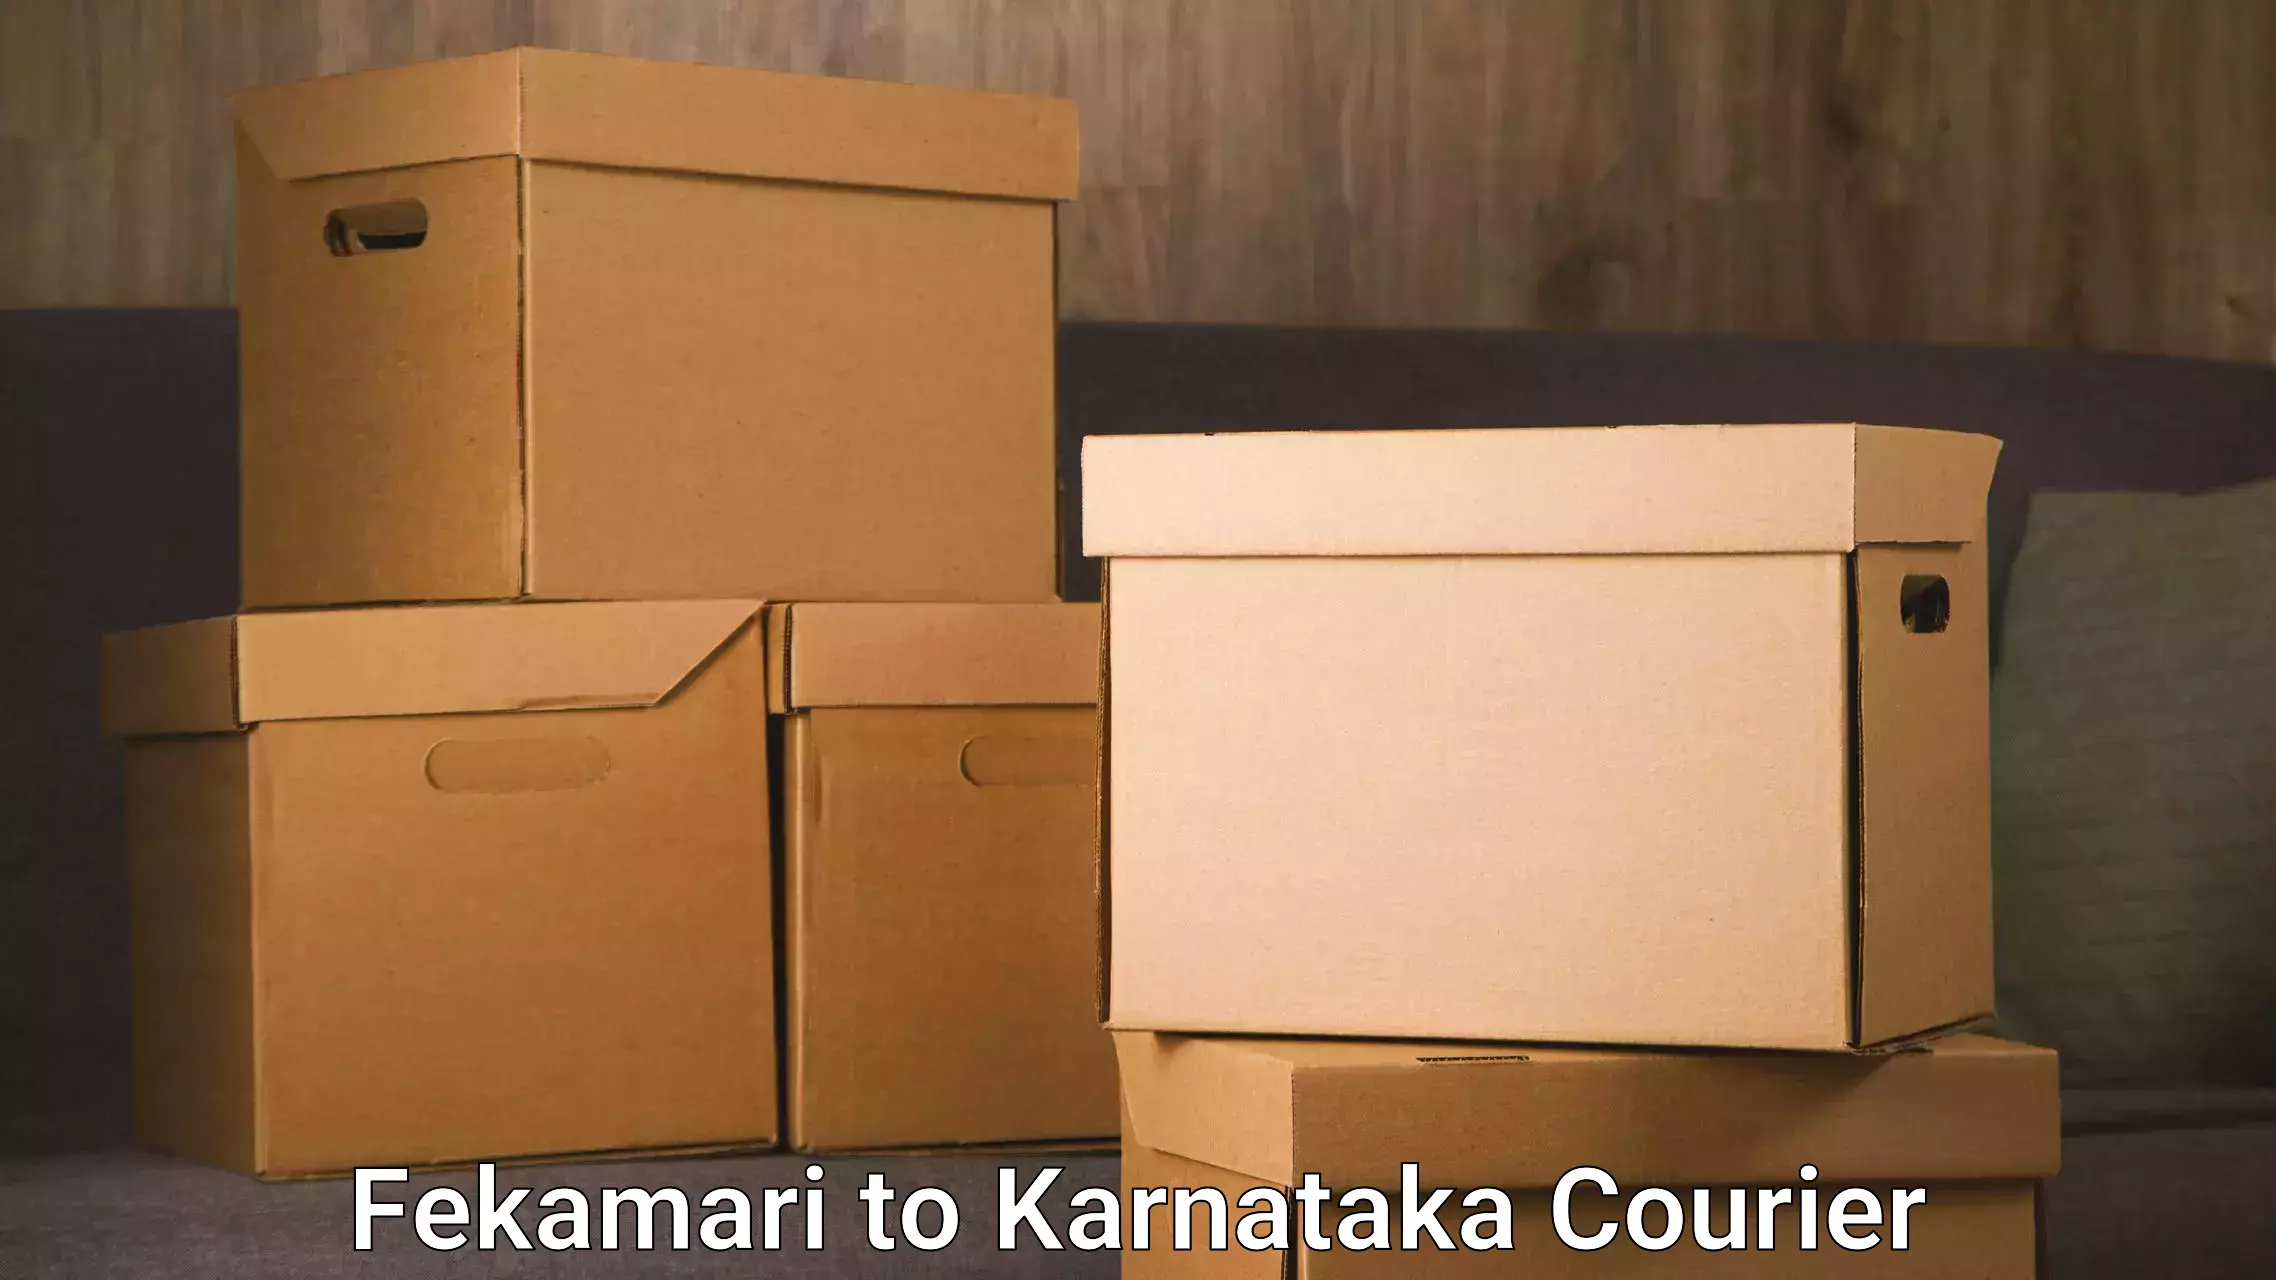 State-of-the-art courier technology Fekamari to Bewoor